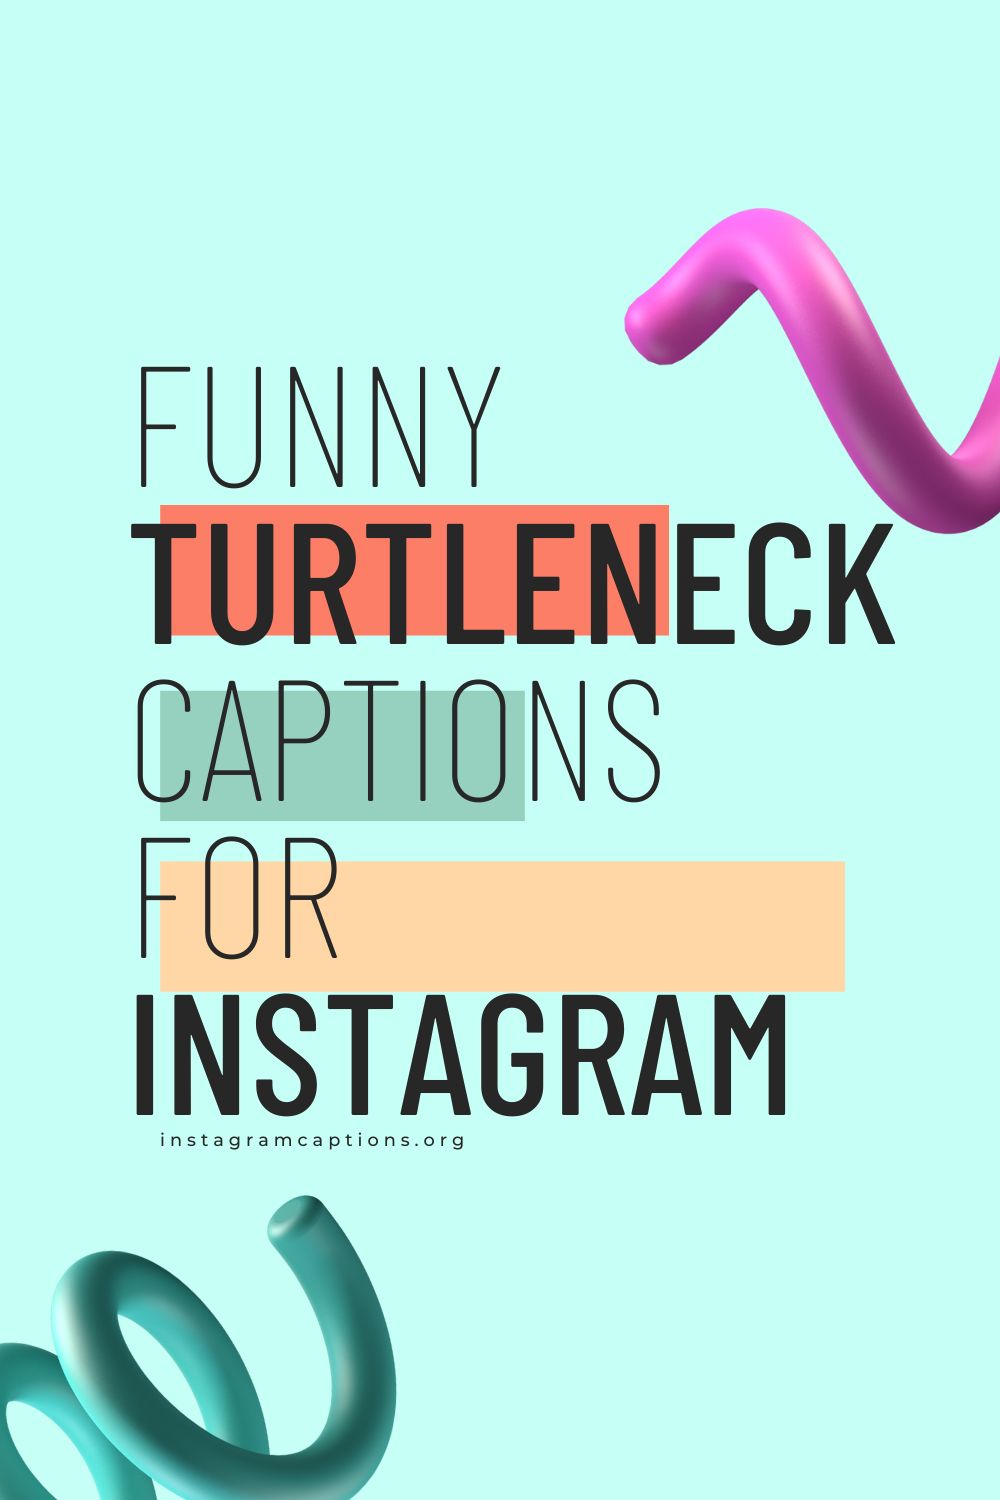 49+ Instagram Captions for All Your Trendy Turtleneck Pics